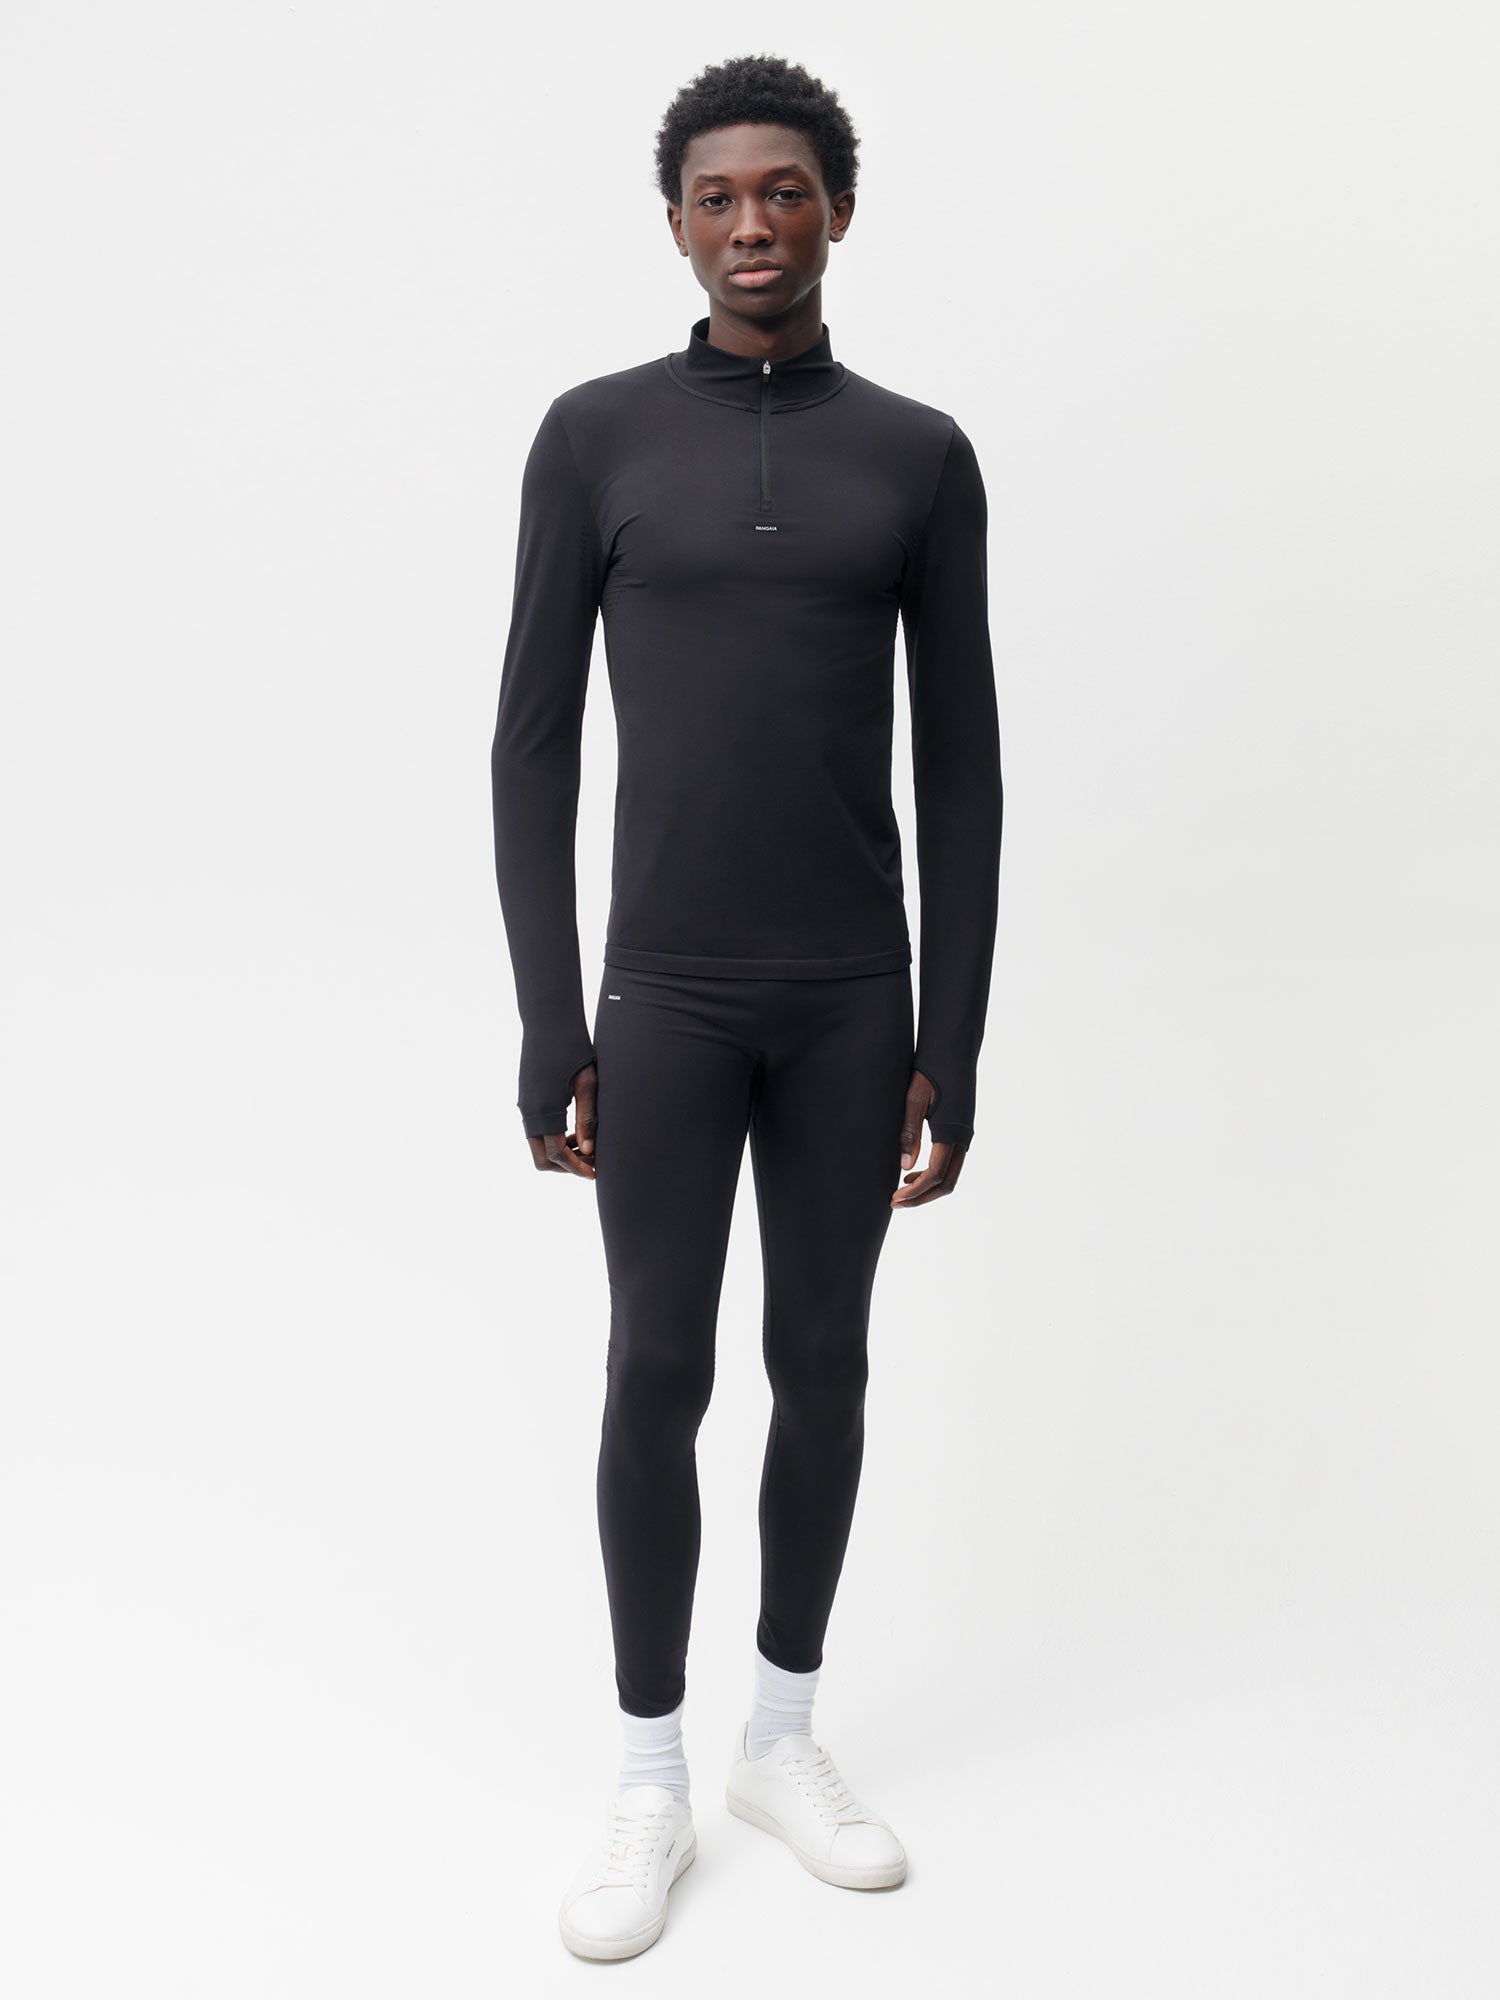 Activewear-3.1-Seamless-Tights-Black-Male-1